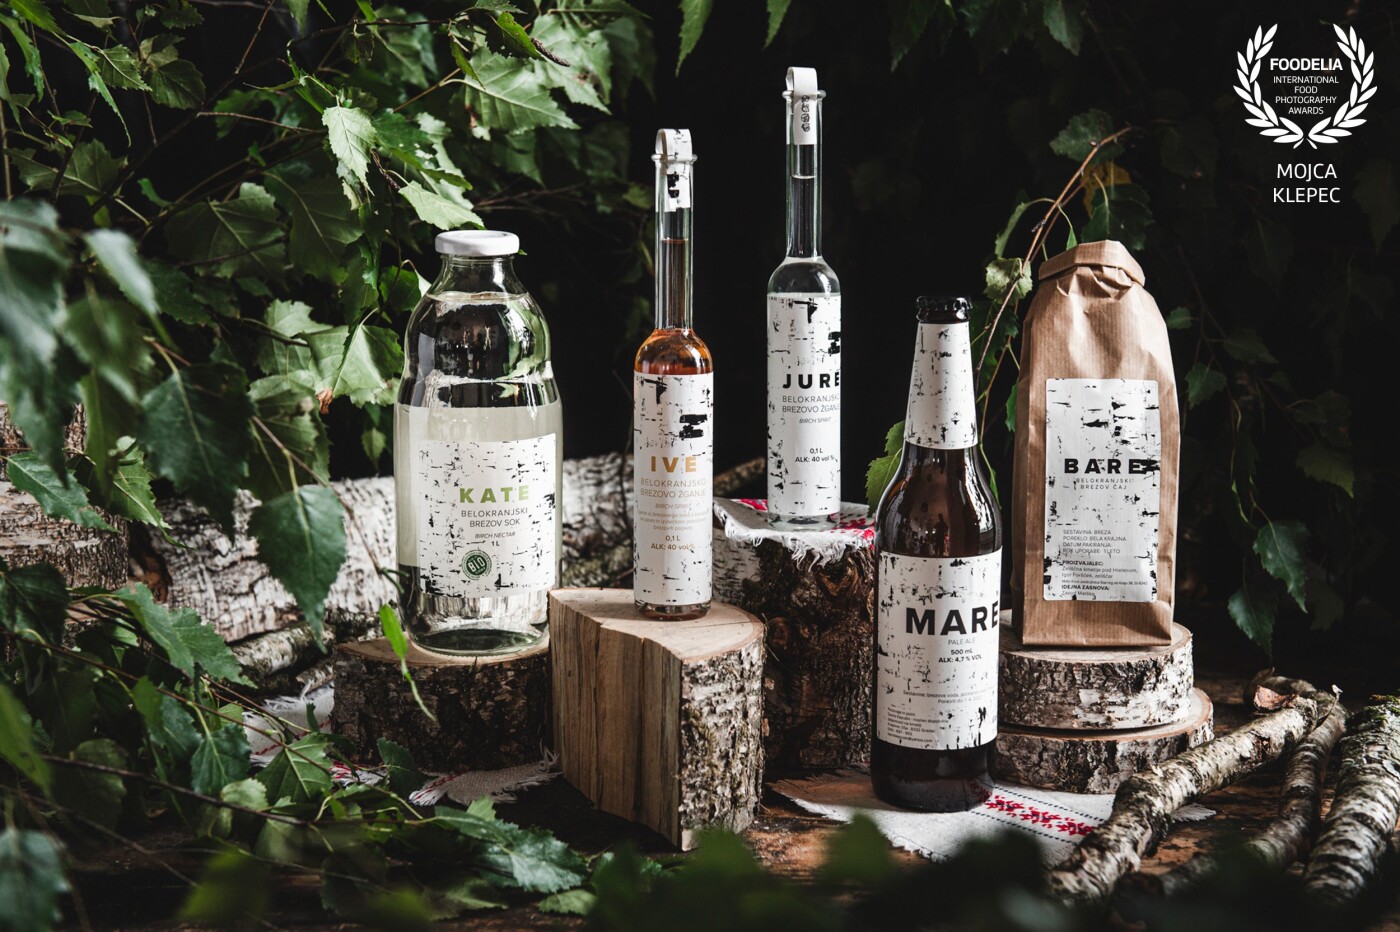 Slovenian region Bela krajina is known for birch trees. What better way to present products made from birch as to make a scene using birch wood and birch leaves and some traditional napkins from the region. Client: https://hisadobrot-belekrajine.si/